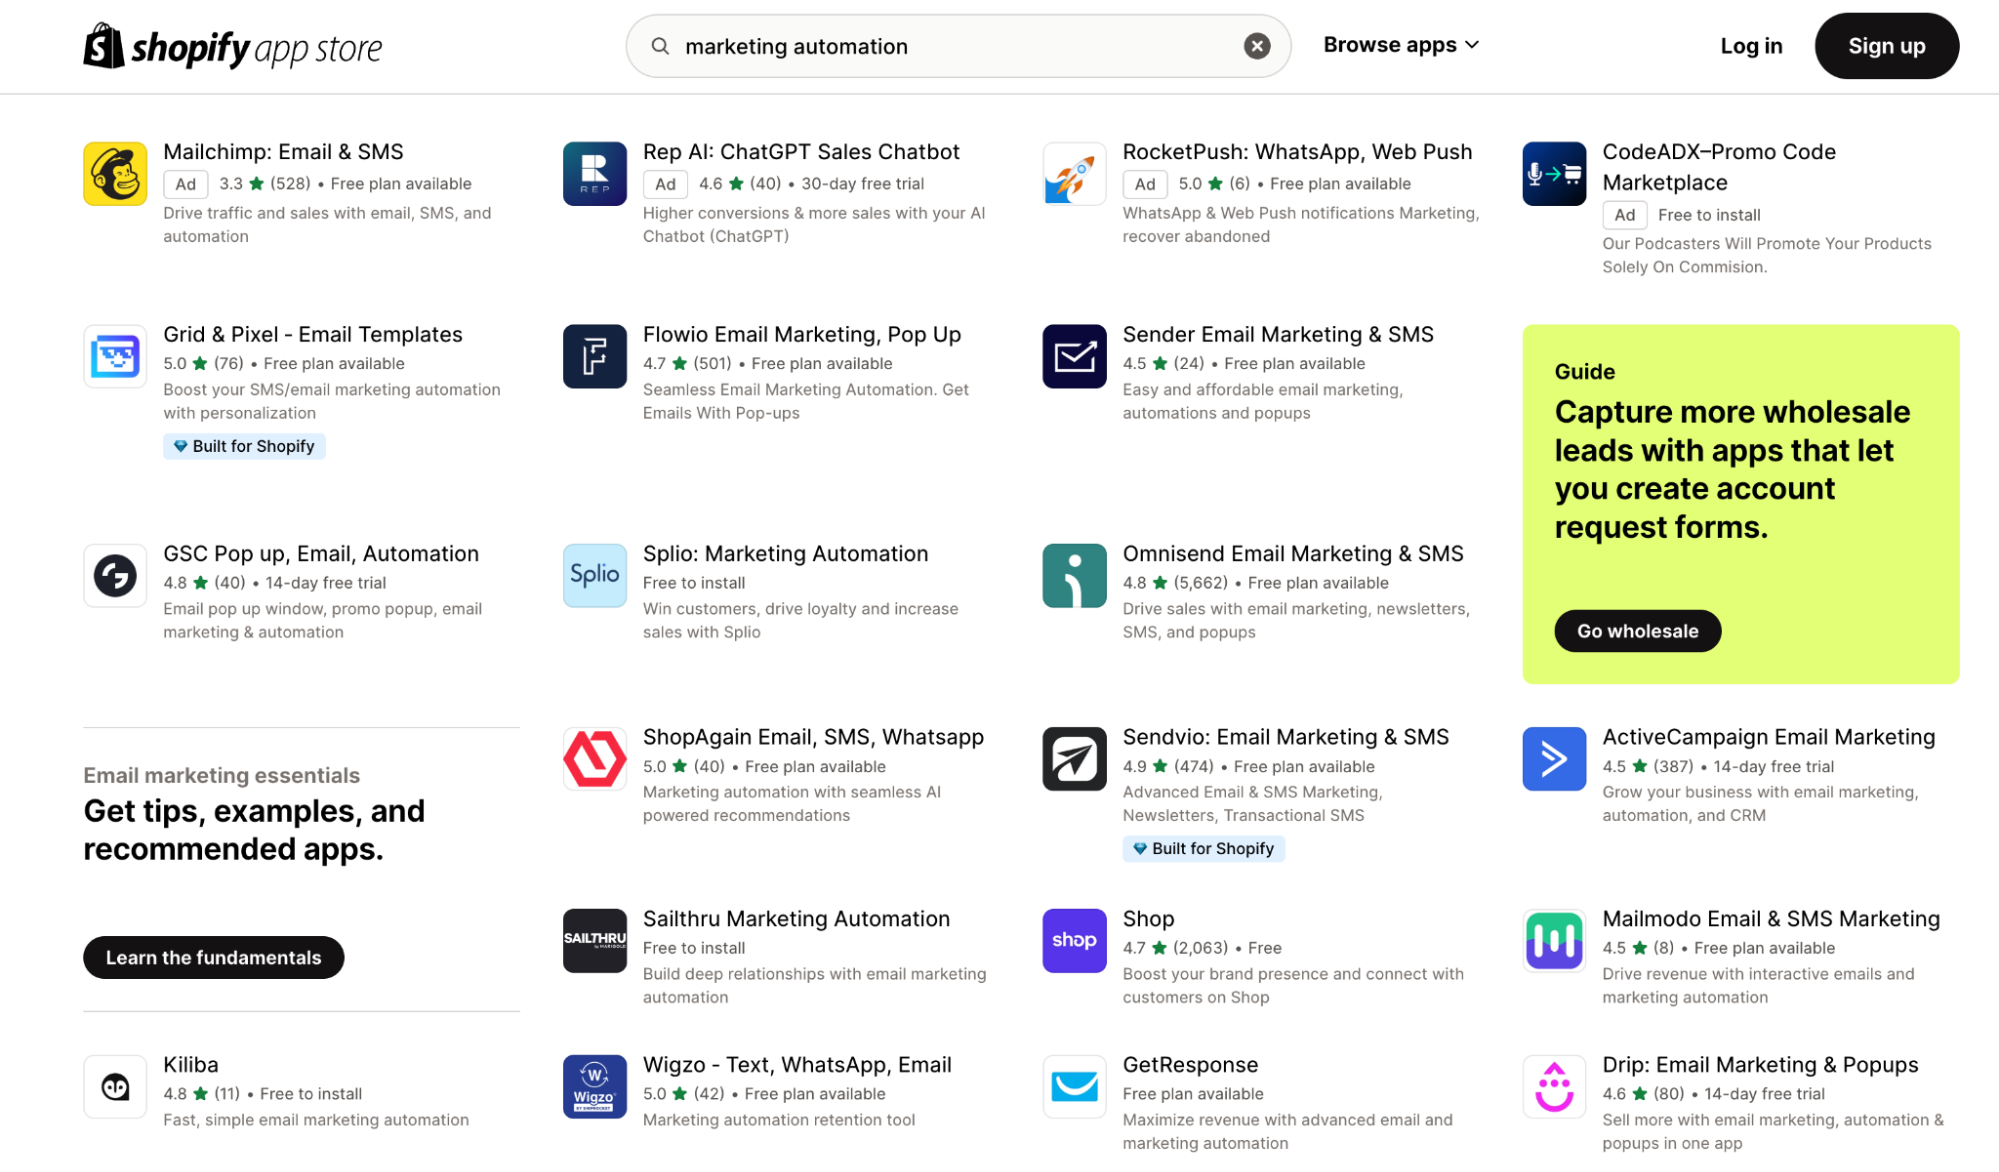 Shopify’s App Store with links to the top marketing automation apps listed out in two columns.